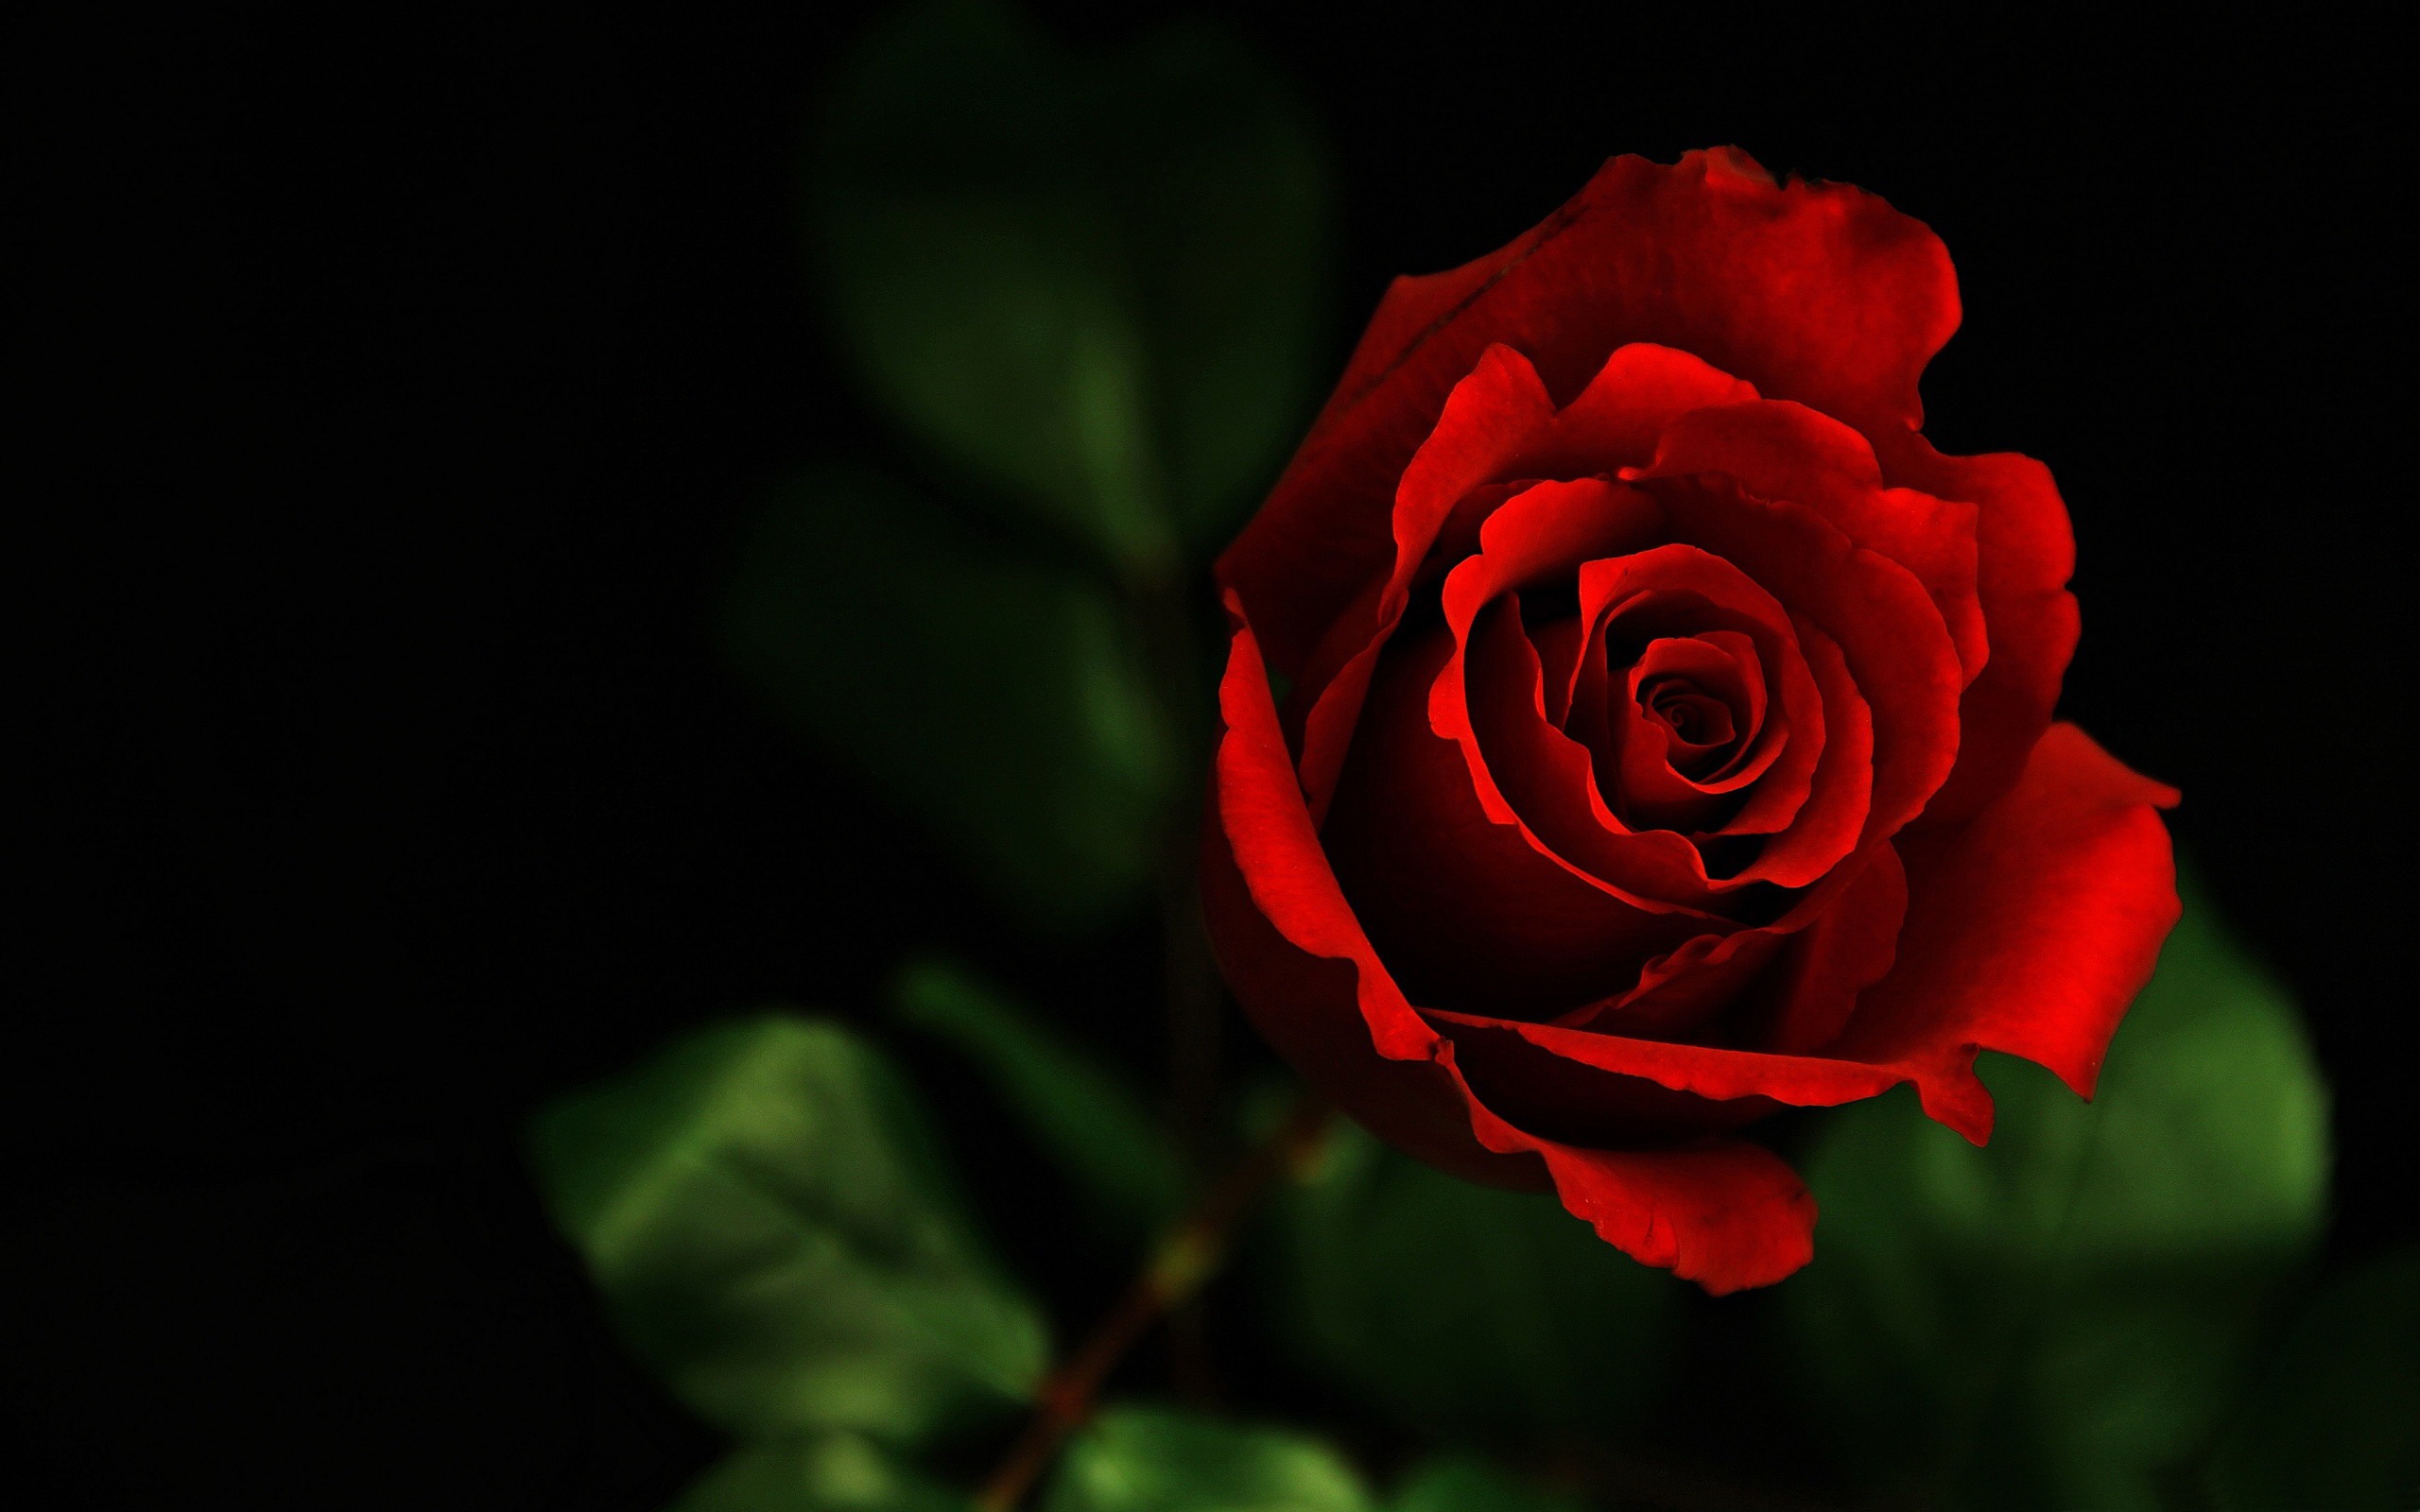 Red Roses Wallpapers HD A6